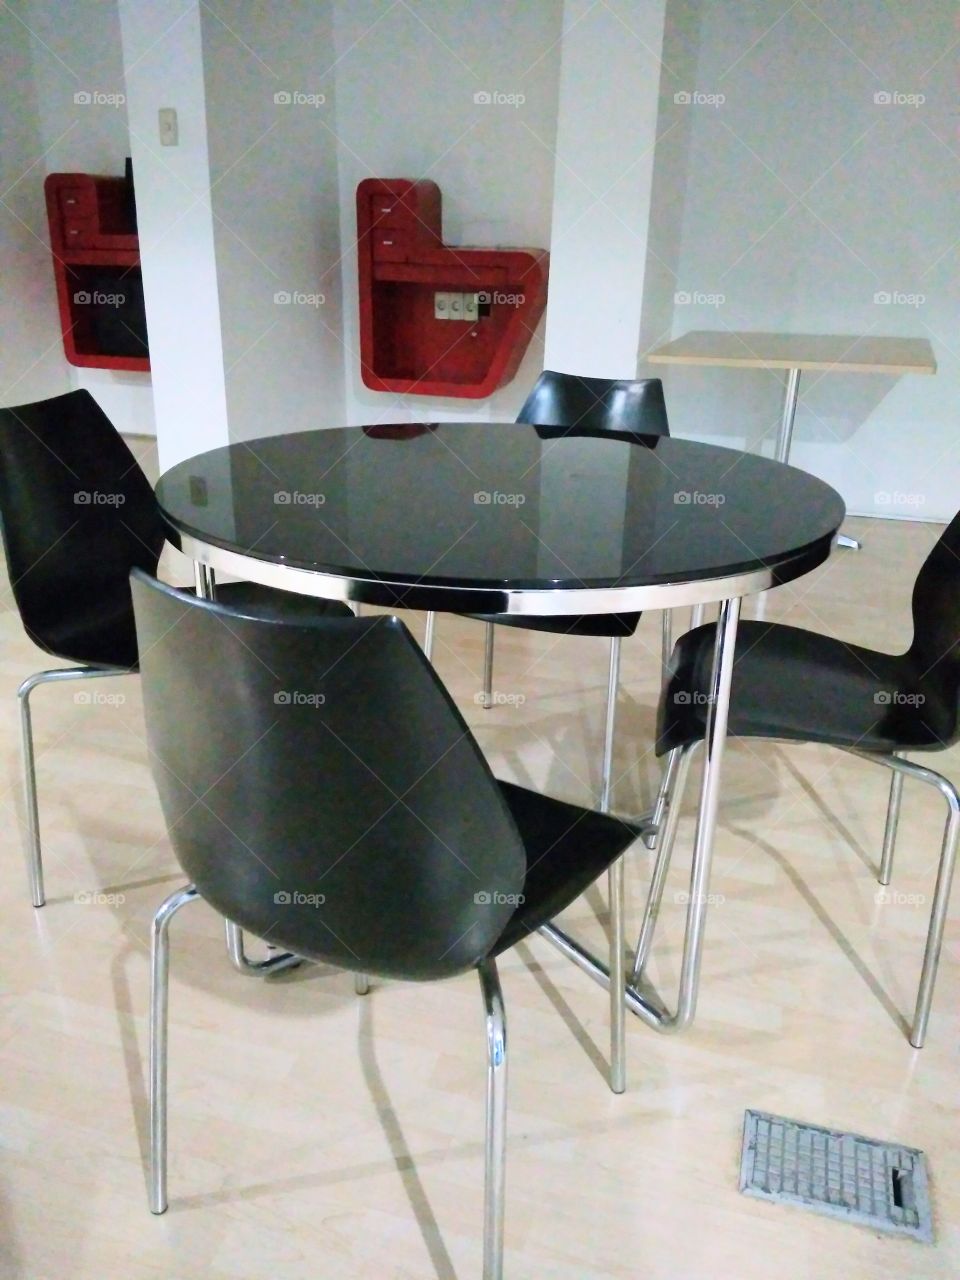 Table for meeting office